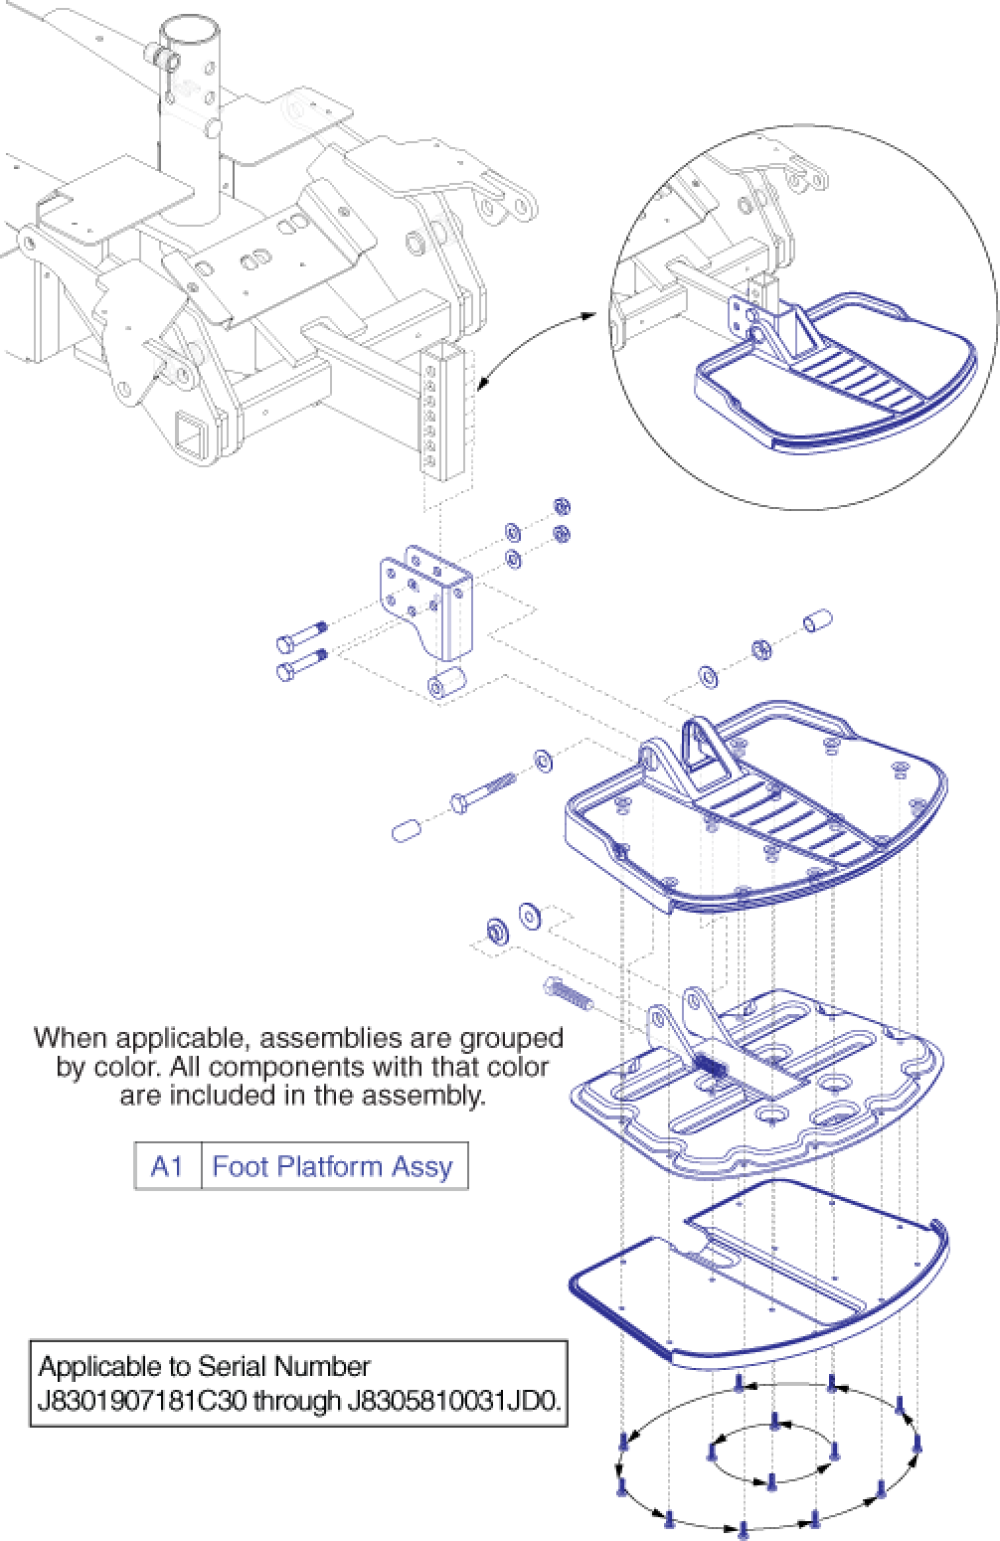 Foot Platform Assembly - Gen 2, Small Stamped parts diagram